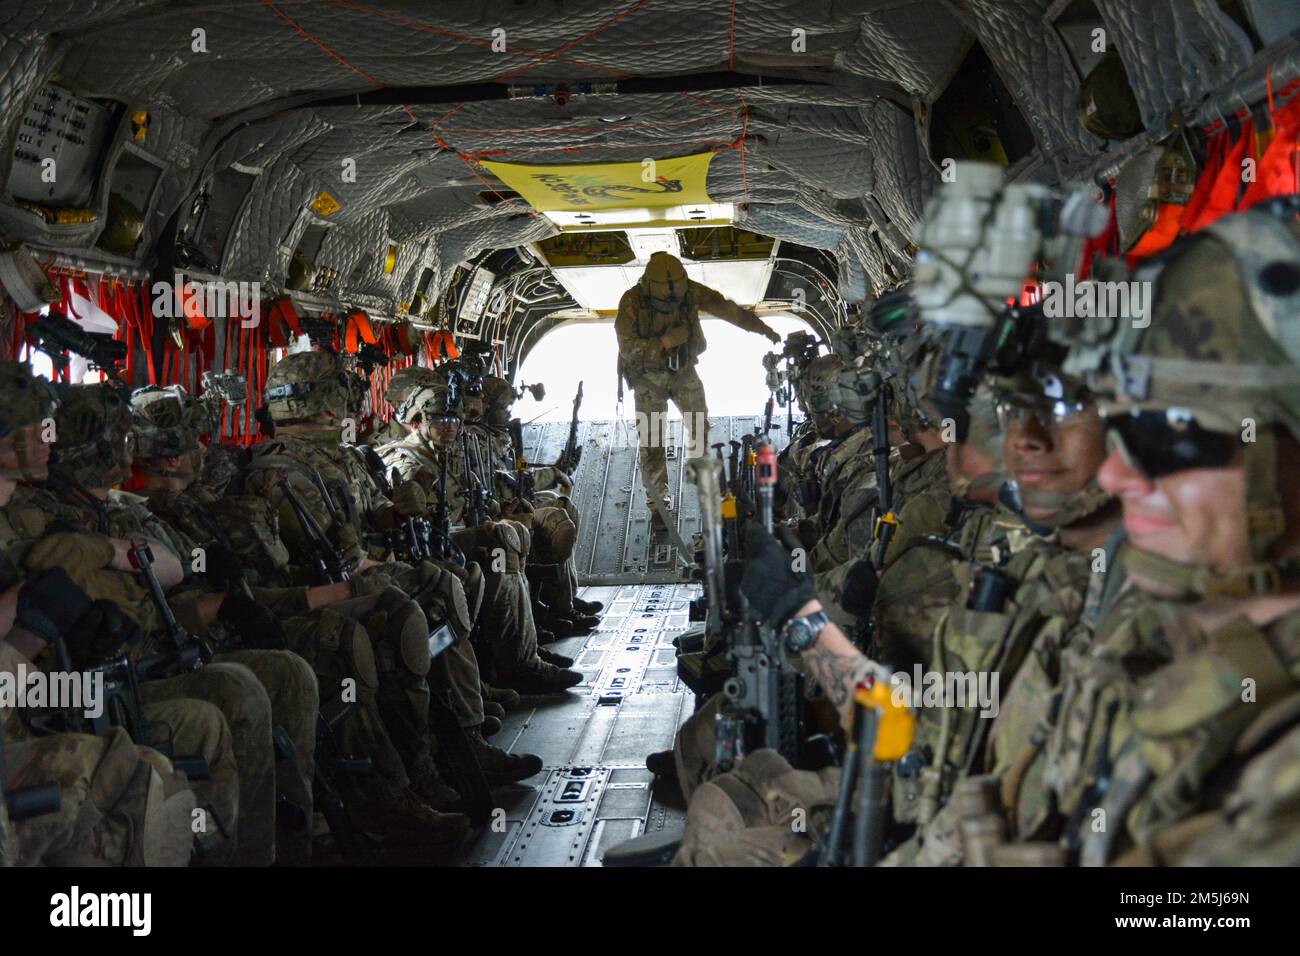 Black Lion Soldiers assigned to the 1st Battalion, 28th Infantry Regiment, 3rd Infantry Division sit on a CH-47 Chinook helicopter to conduct an air assault mission over Fort Stewart, Georgia, March 18, 2022. The air assault operation placed the 1st Bn., 28th IR into their Combined Arms Live Fire Exercise event to be conducted at Fort Stewart. A CALFX allows a maneuver company to incorporate indirect fires, aerial and sustainment assets to simulate realistic combat training. Stock Photo